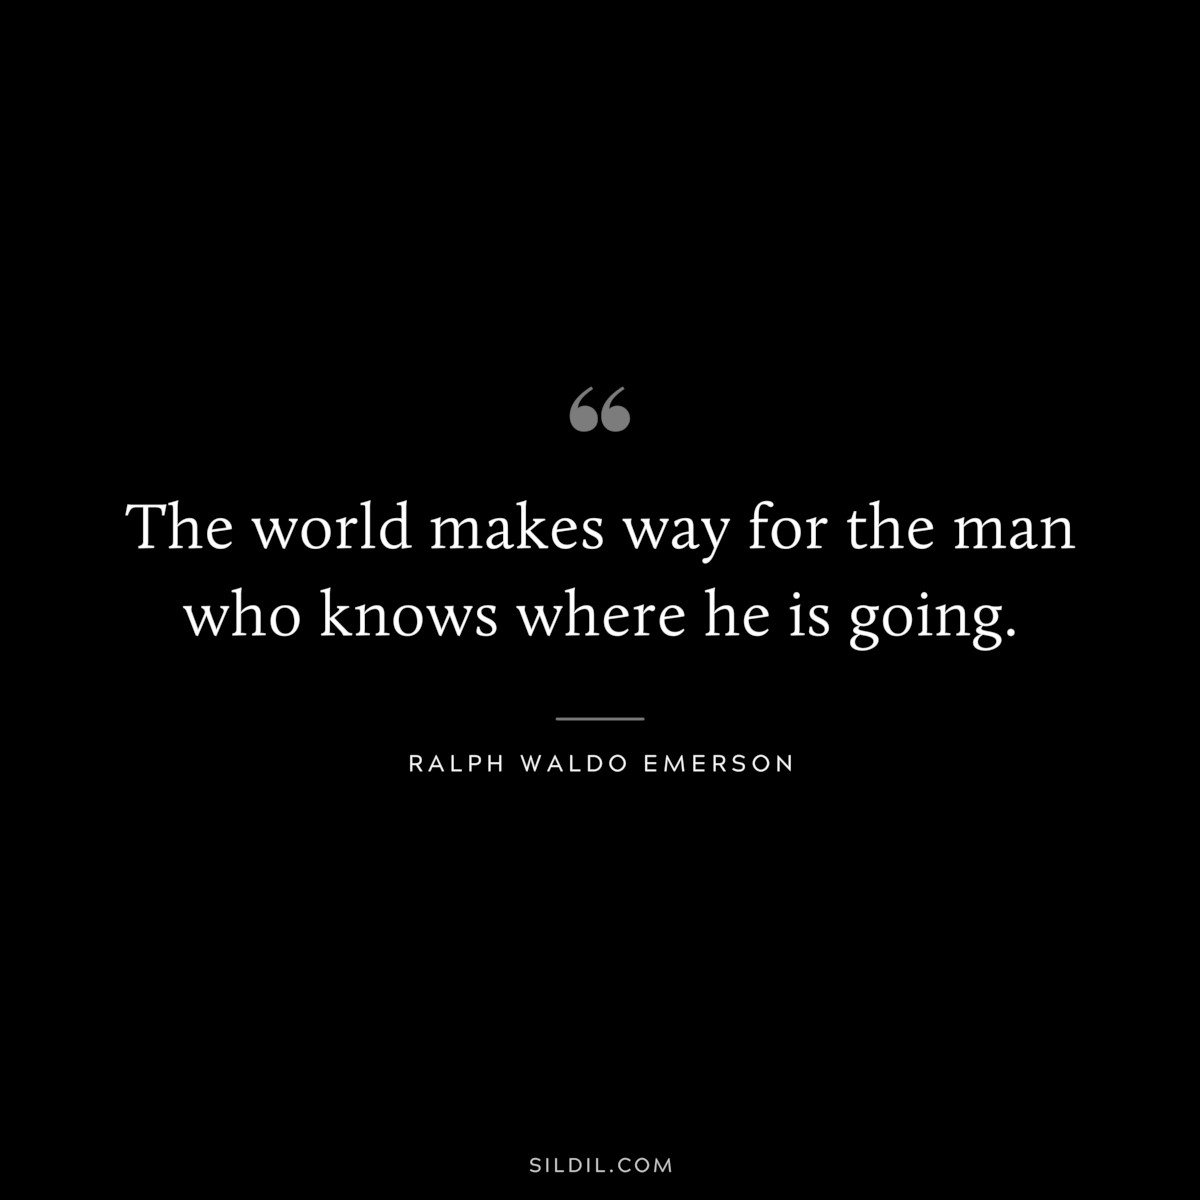 The world makes way for the man who knows where he is going. ― Ralph Waldo Emerson